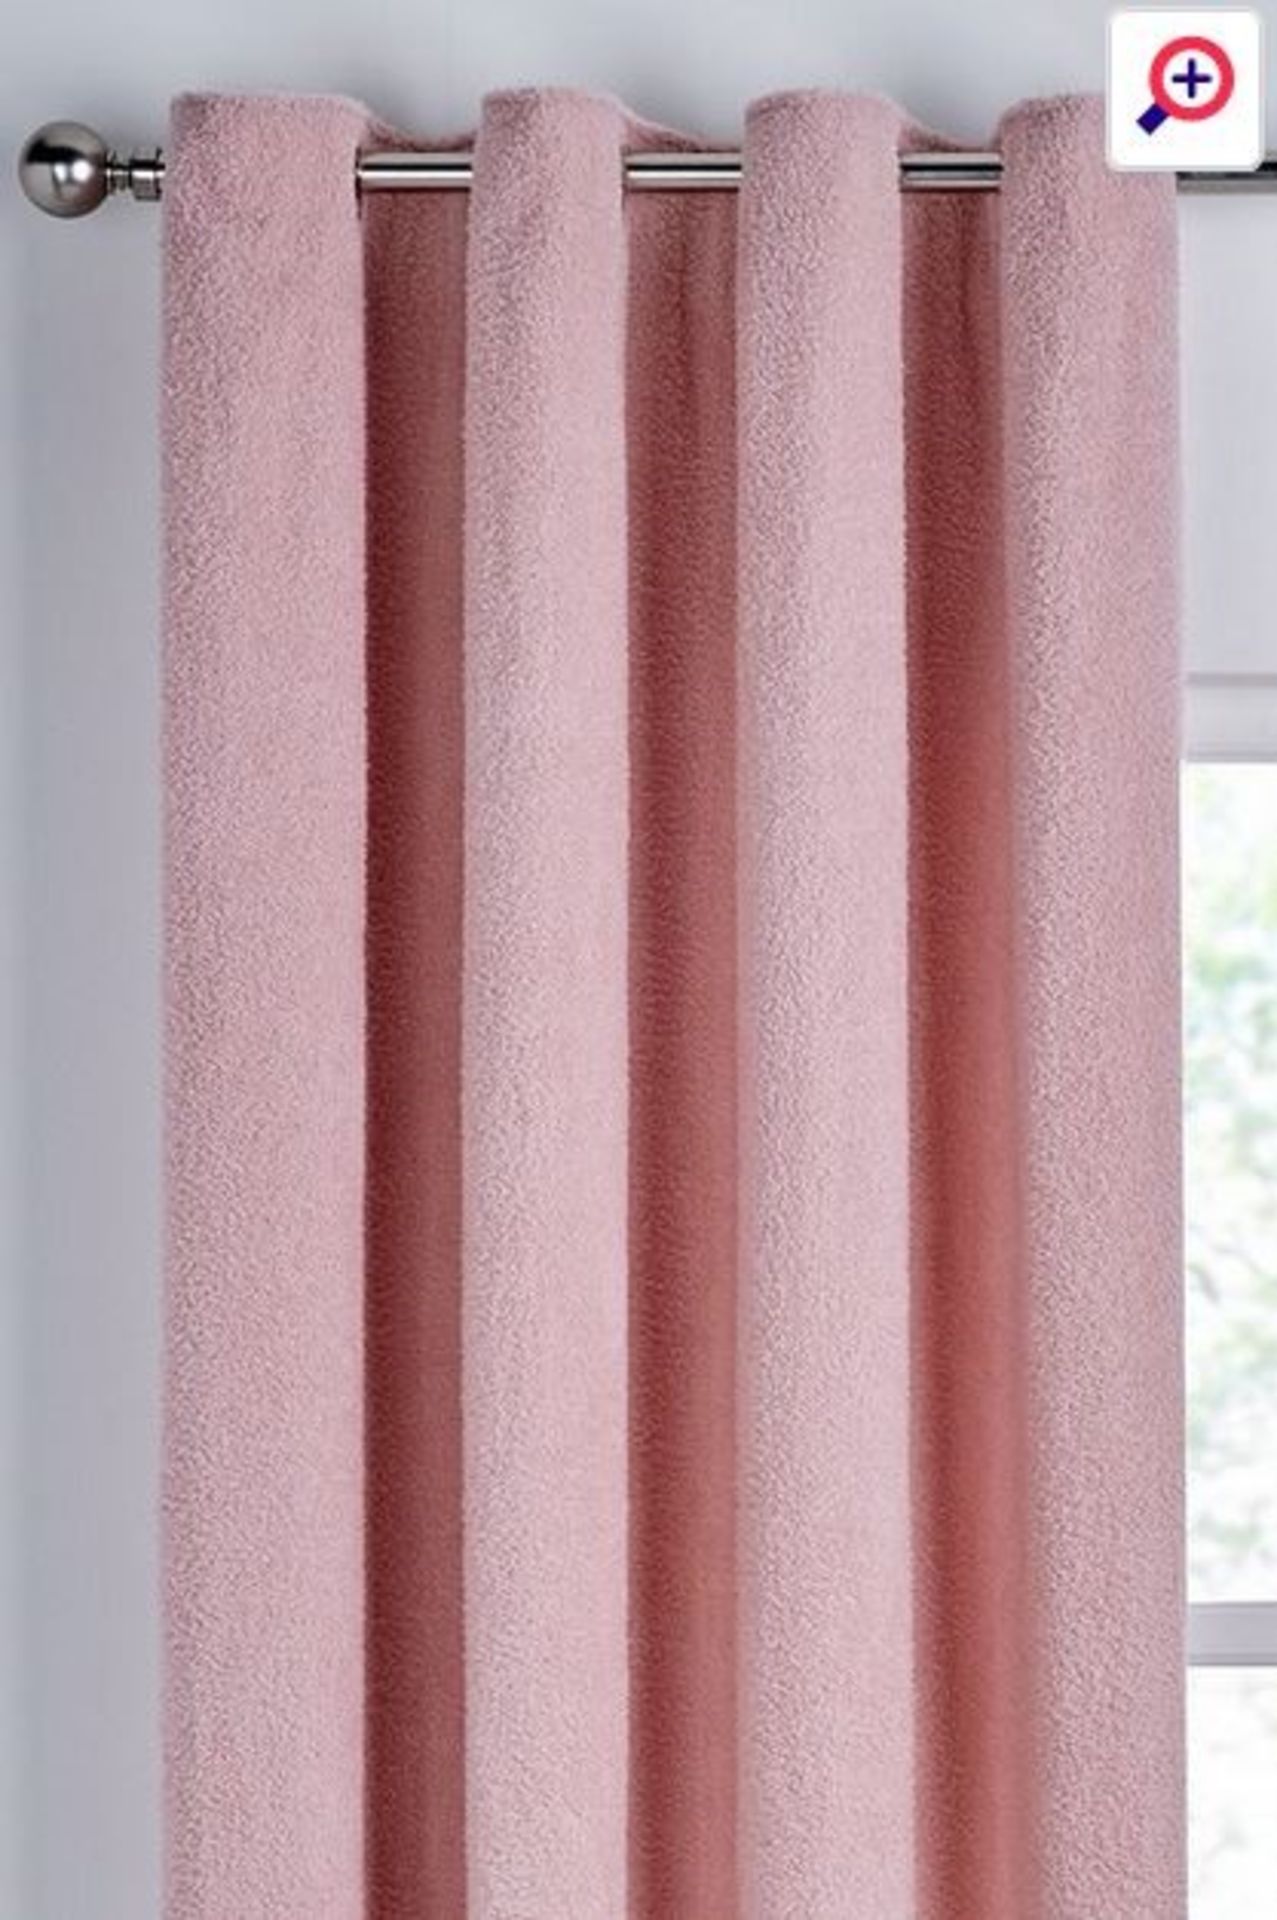 1 TEDDY COSY TEDDY EYELET CURTAINS - GREY / SIZE: 66 X 72" (COLOUR DIFFERENT THAN PICTURED)